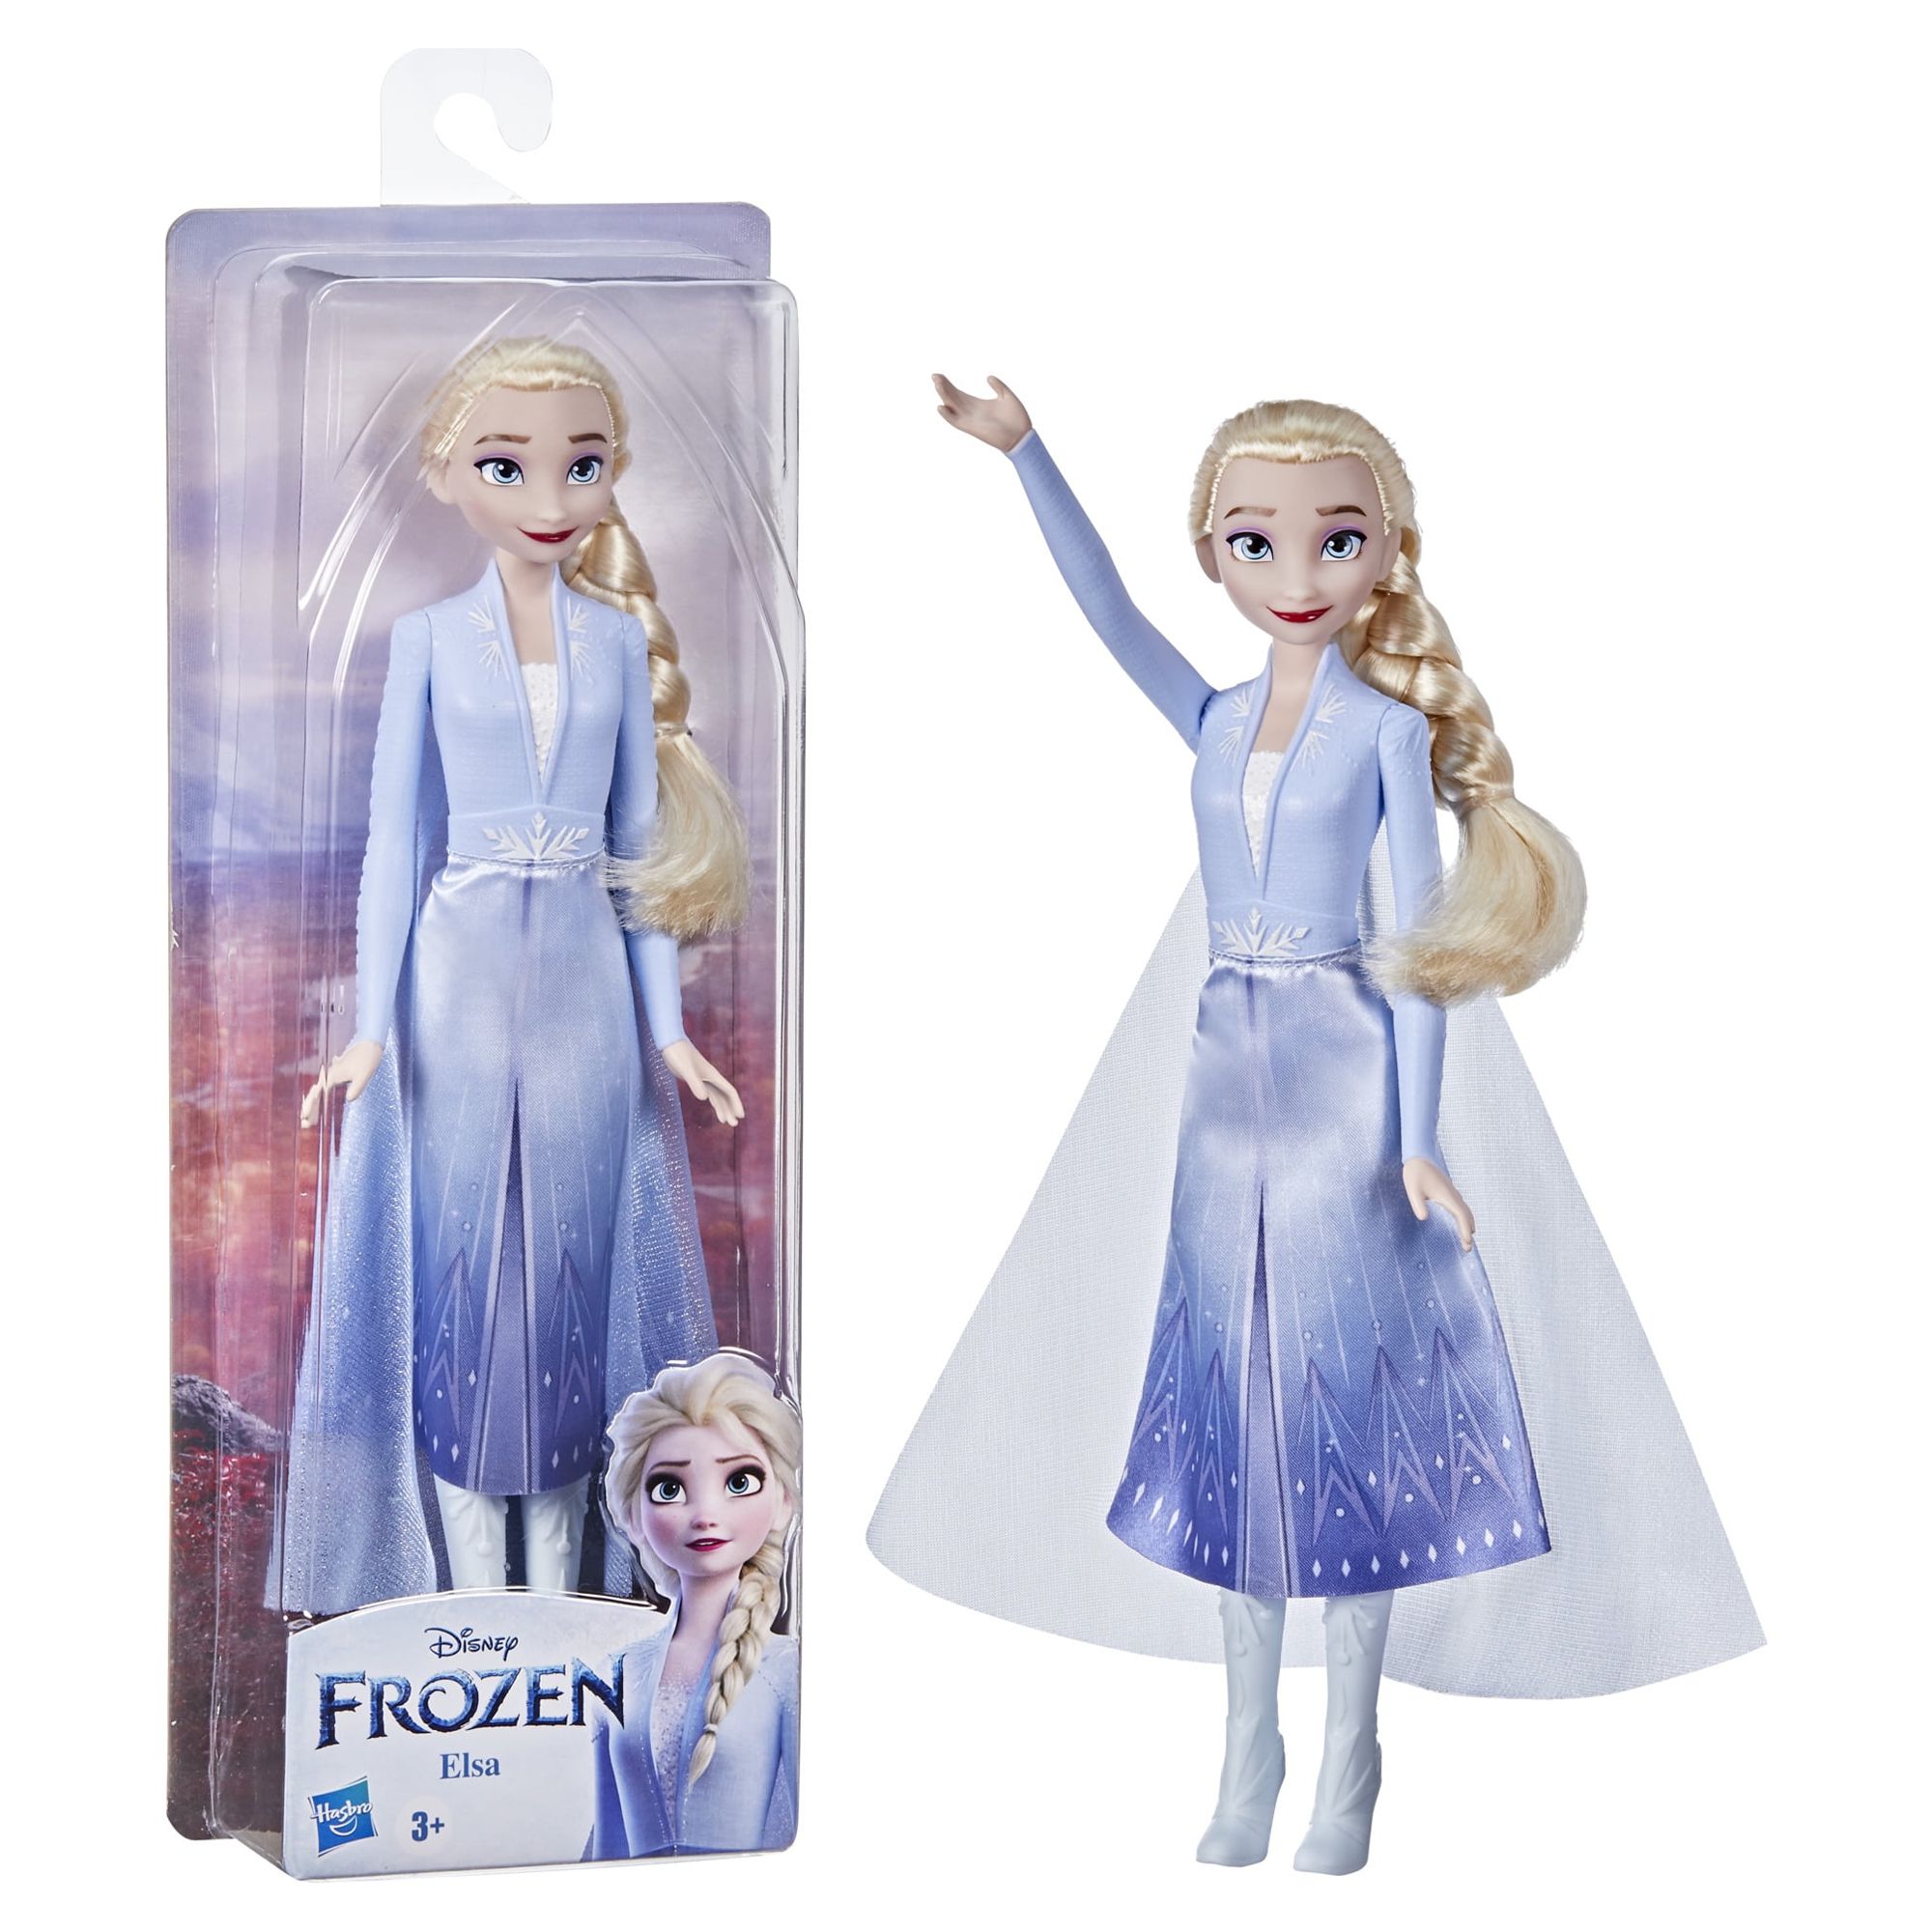 Disney's Frozen 2 Elsa Frozen Shimmer Fashion Doll, Accessories Included - image 3 of 11